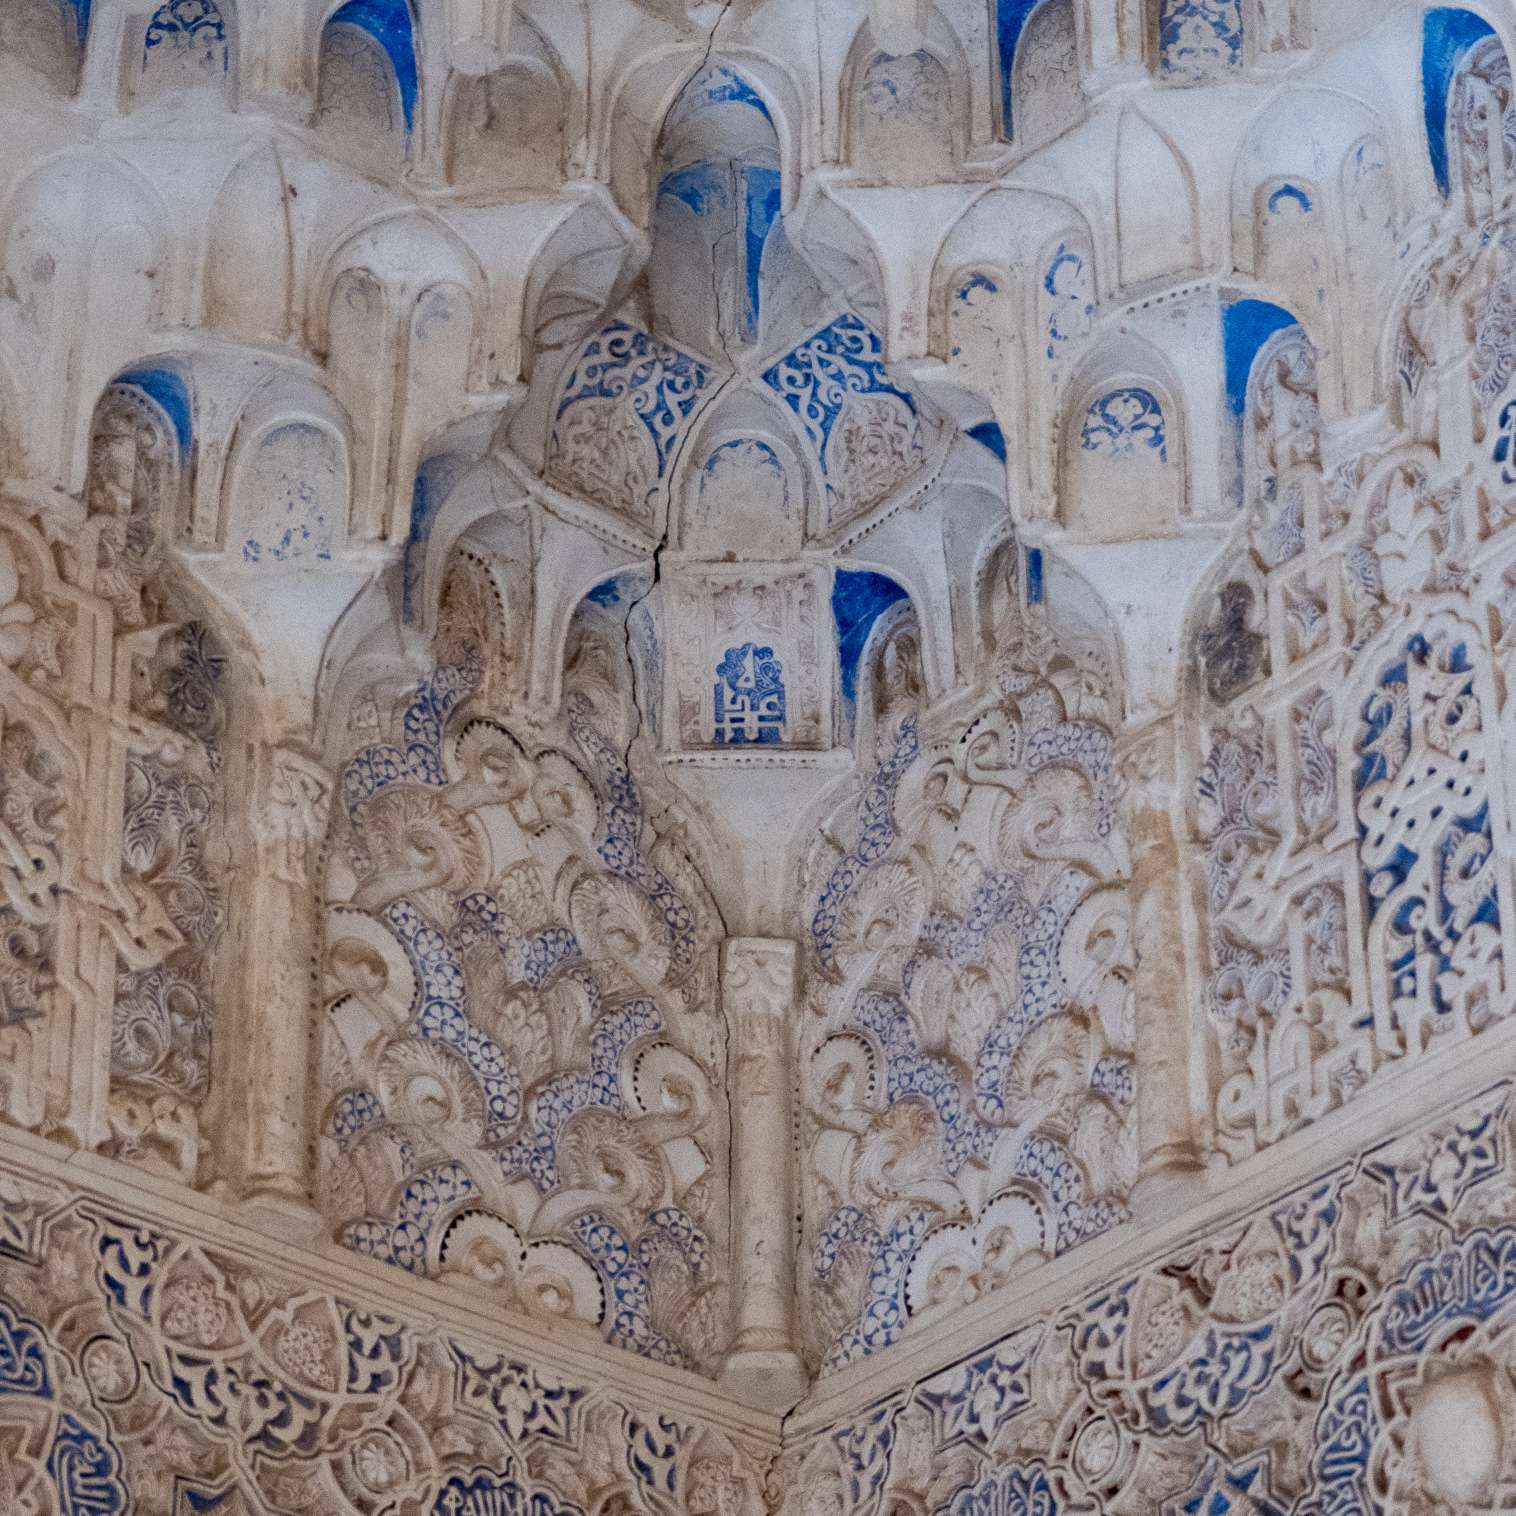 Faded plastered patterns in Nasrid Palace, The Alhambra, Granada